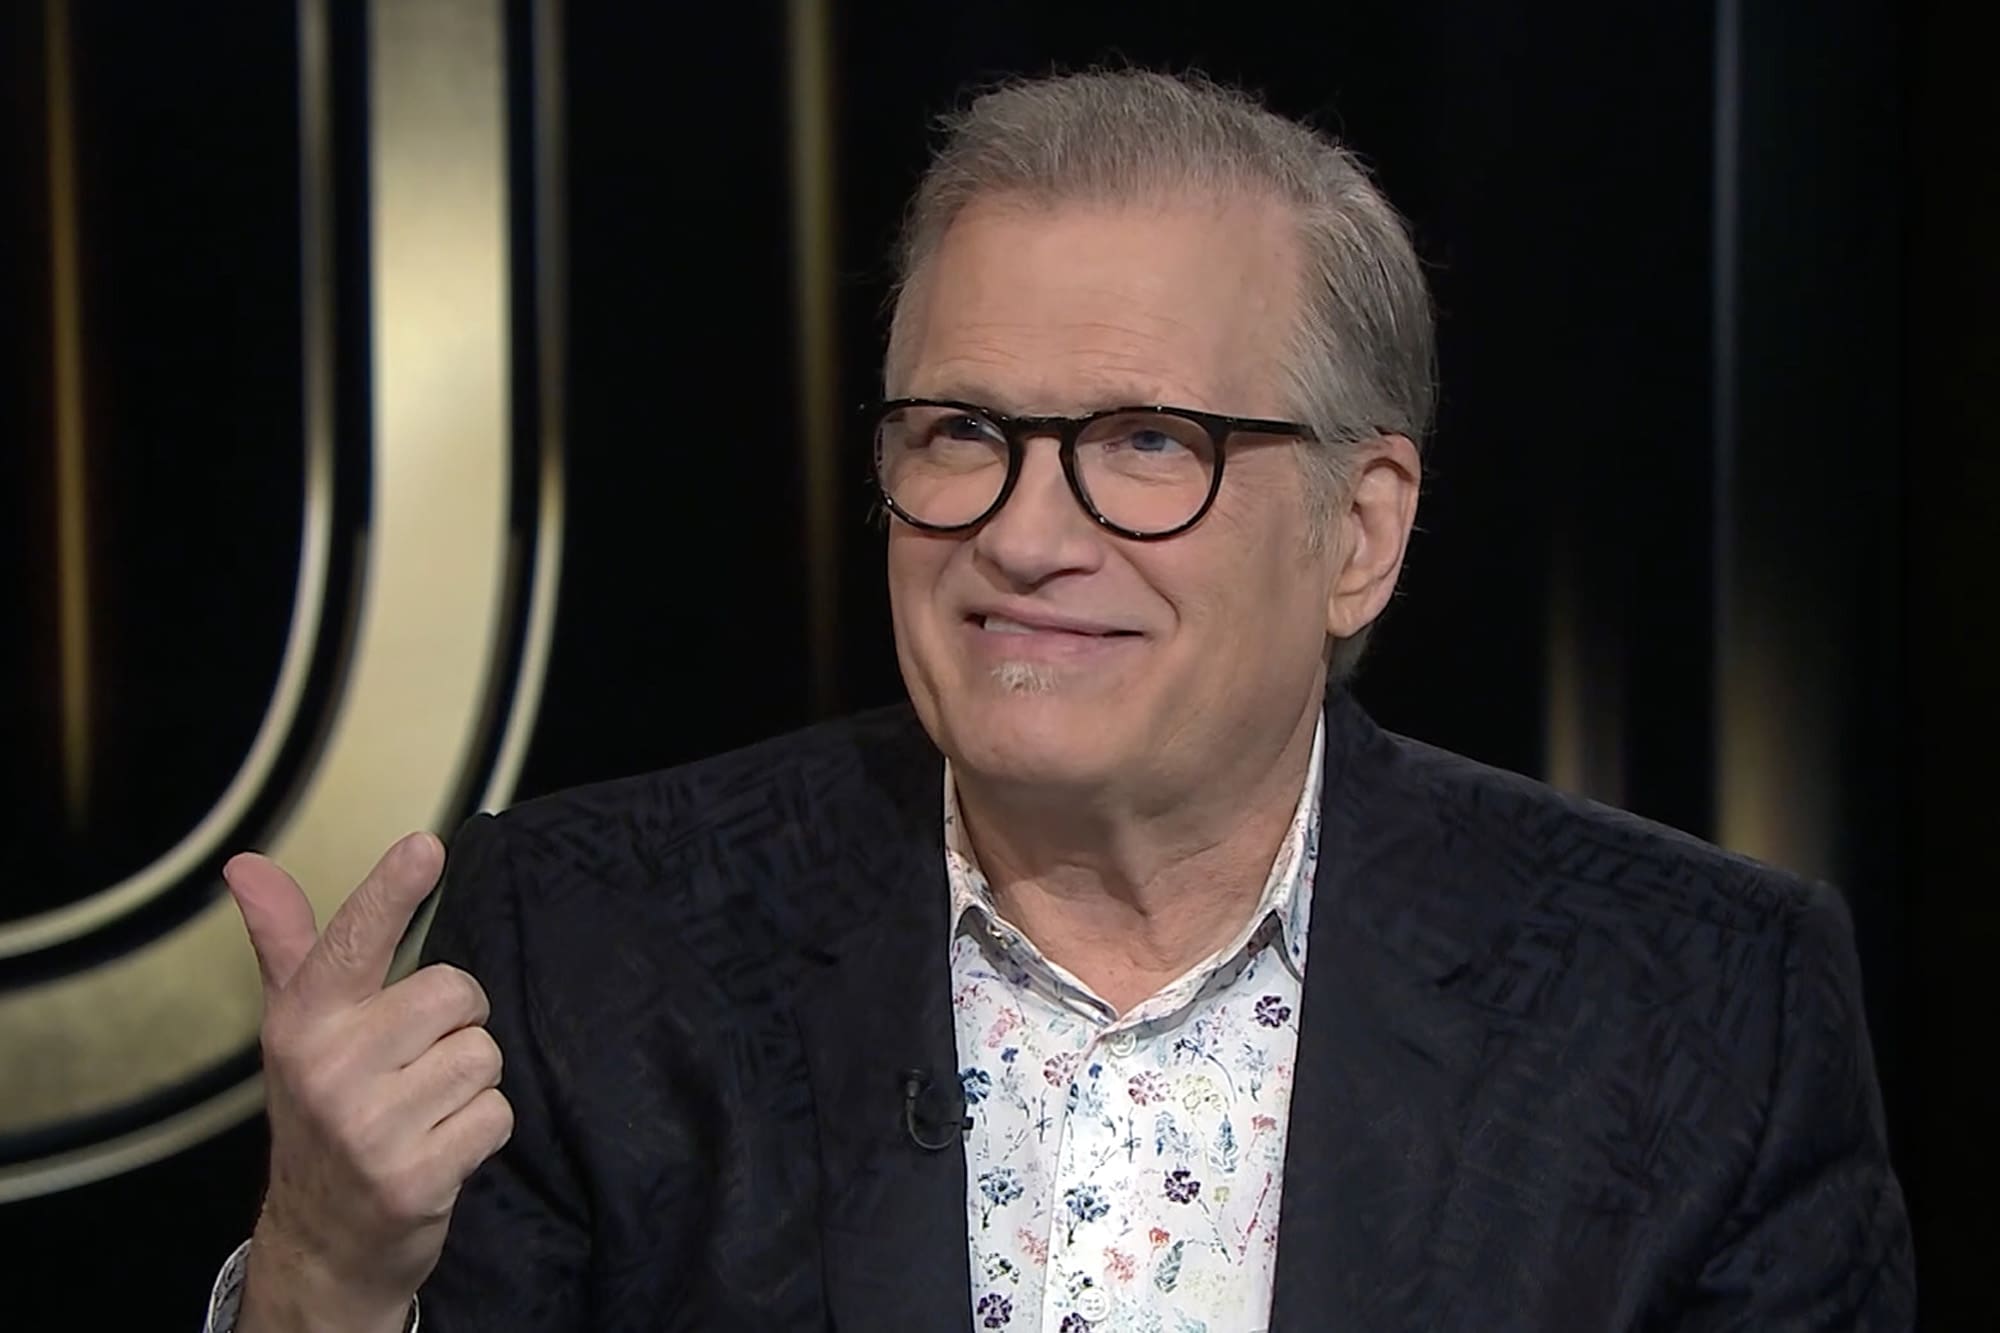 Drew Carey Reflects on His Two Previous Suicide Attempts: ‘I Was Just Tired of My Life’